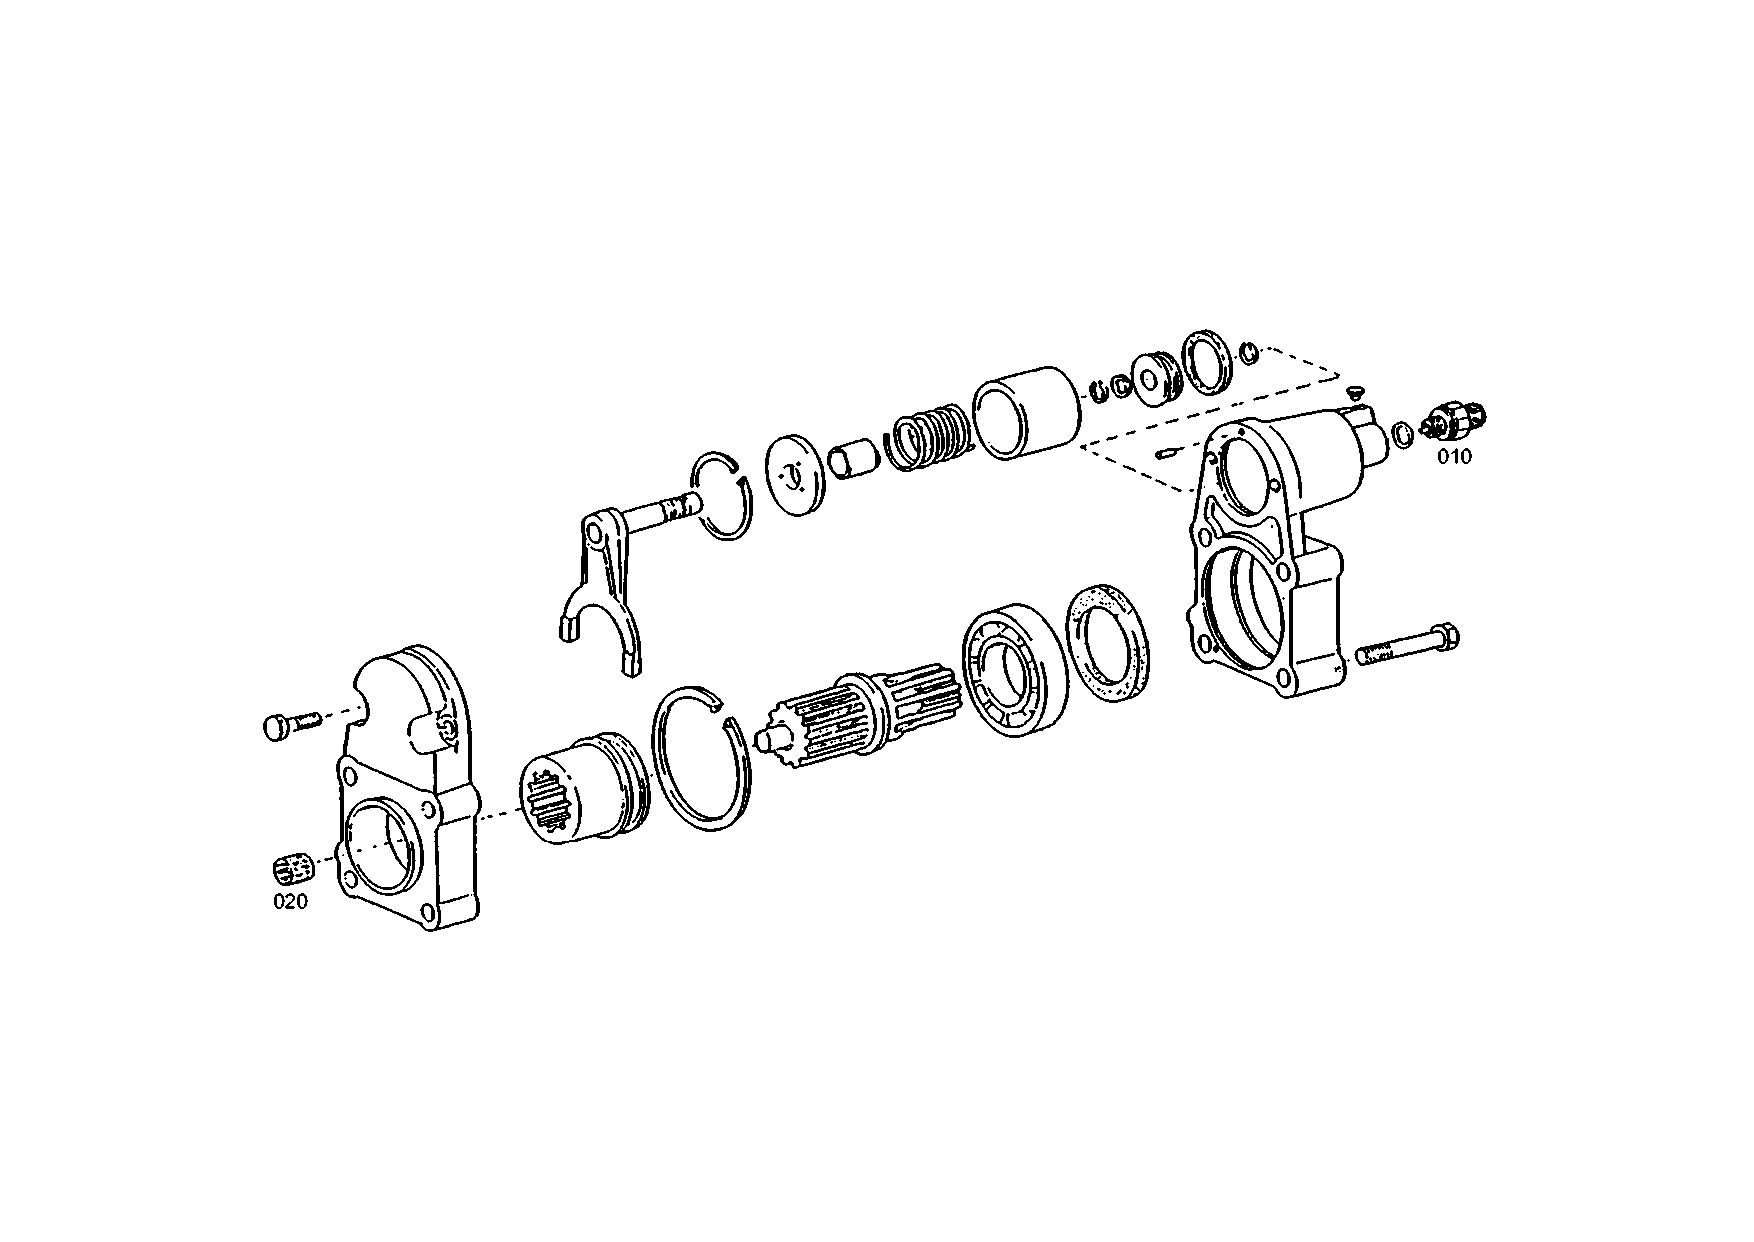 drawing for BELL-SUEDAFRIKA ST20091 - PRESSURE SWITCH (figure 1)